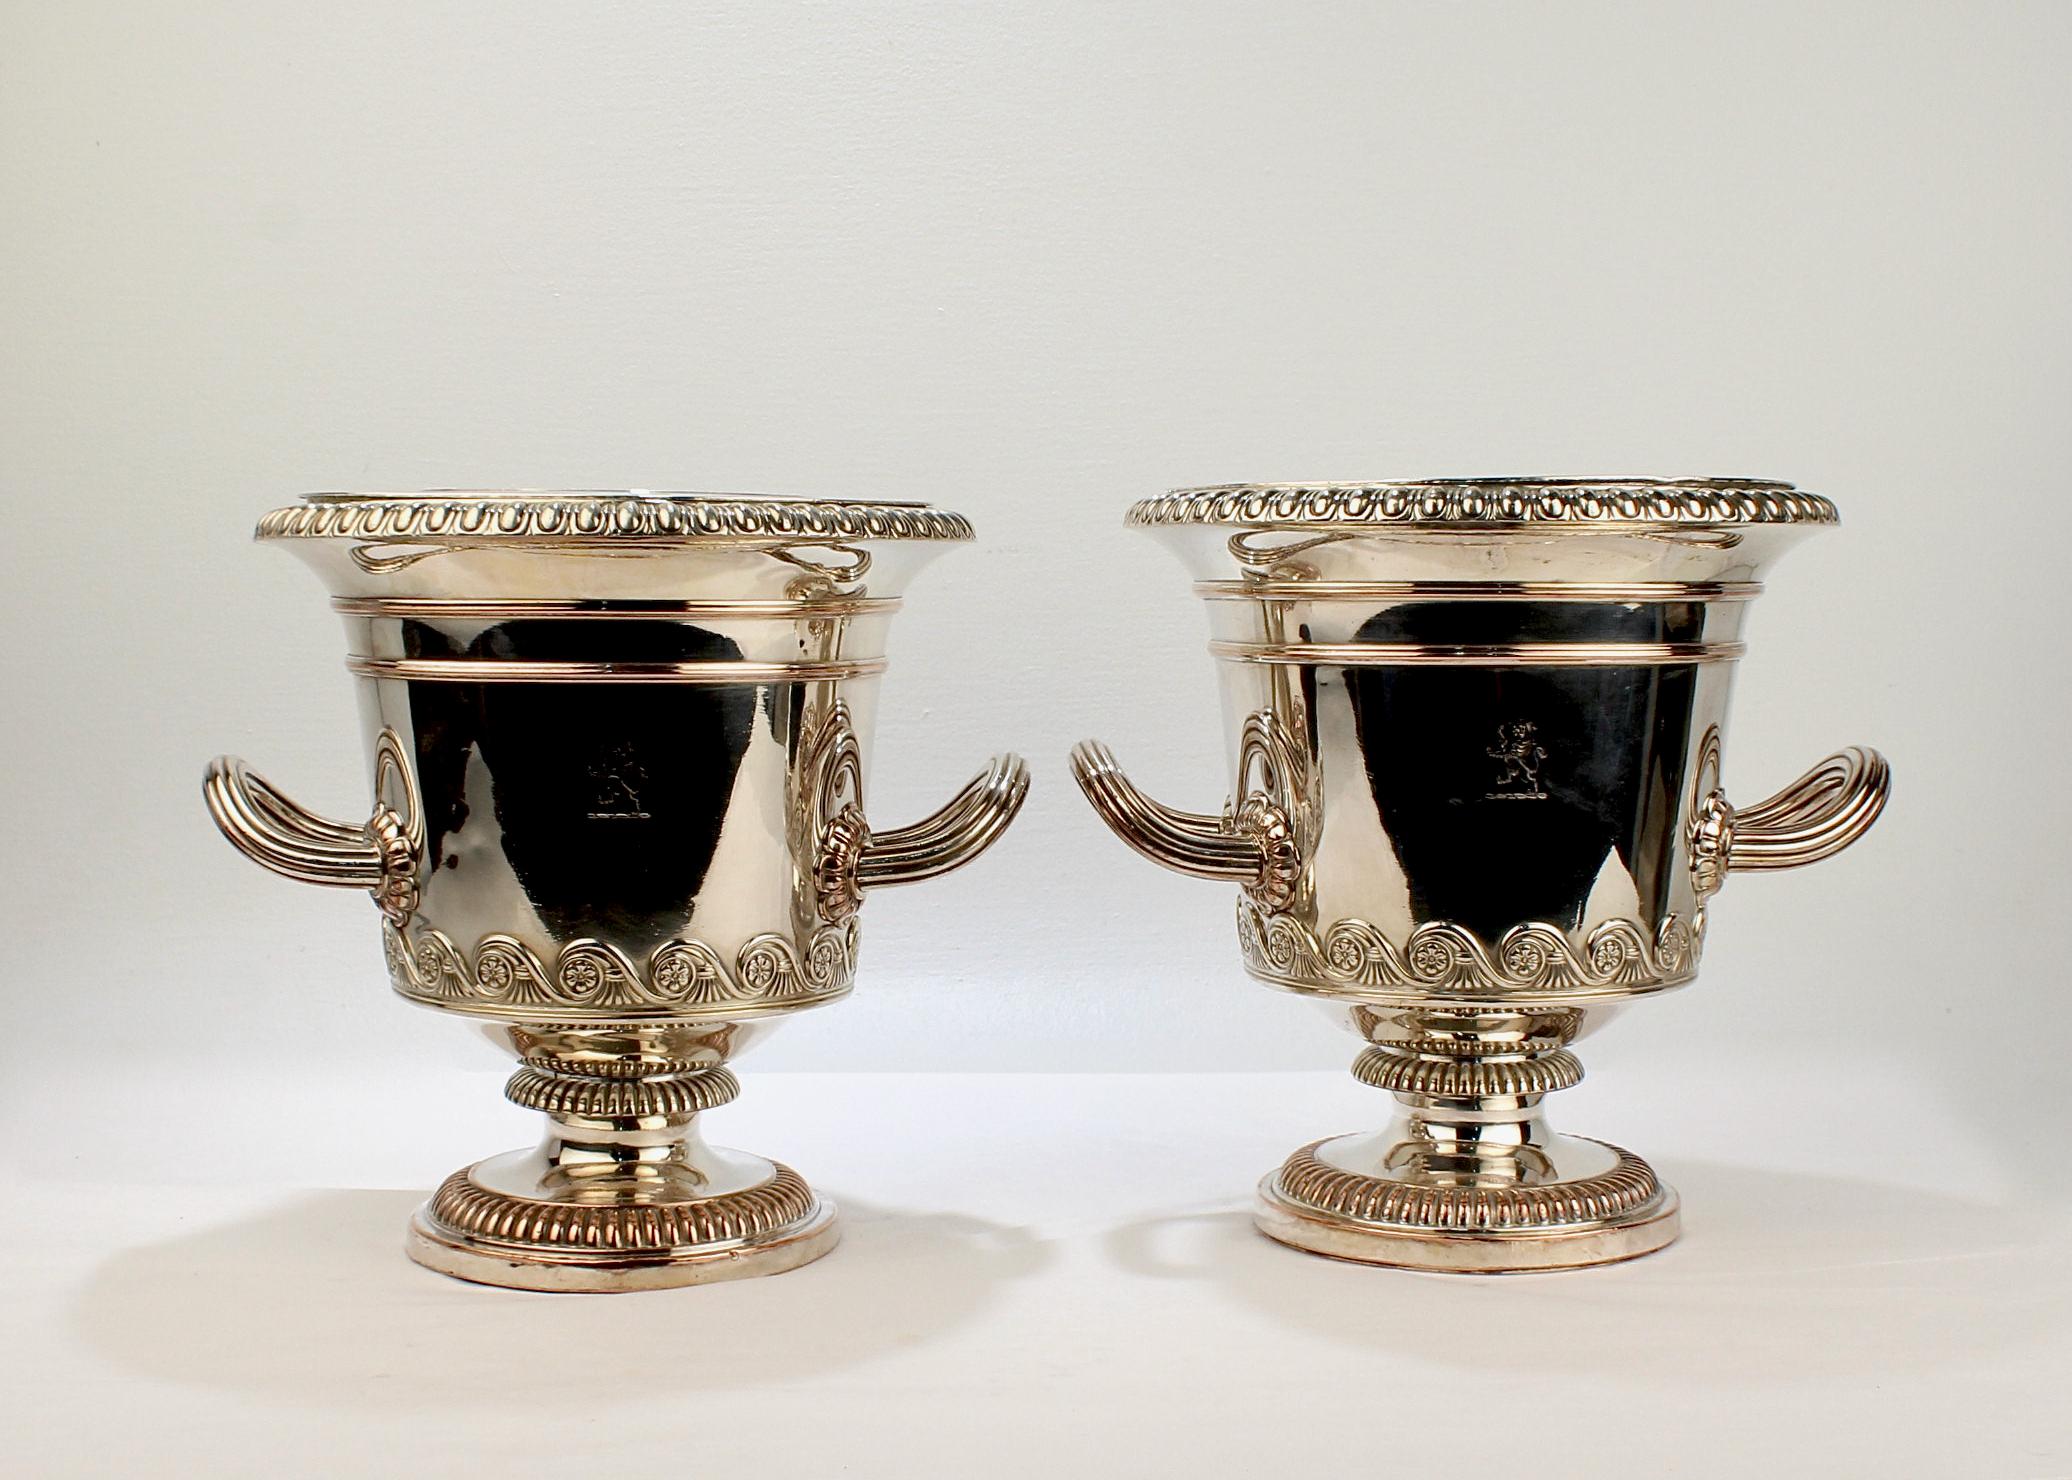 Pair of Antique English Neoclassical Sheffield Plate Wine or Champagne Coolers 1